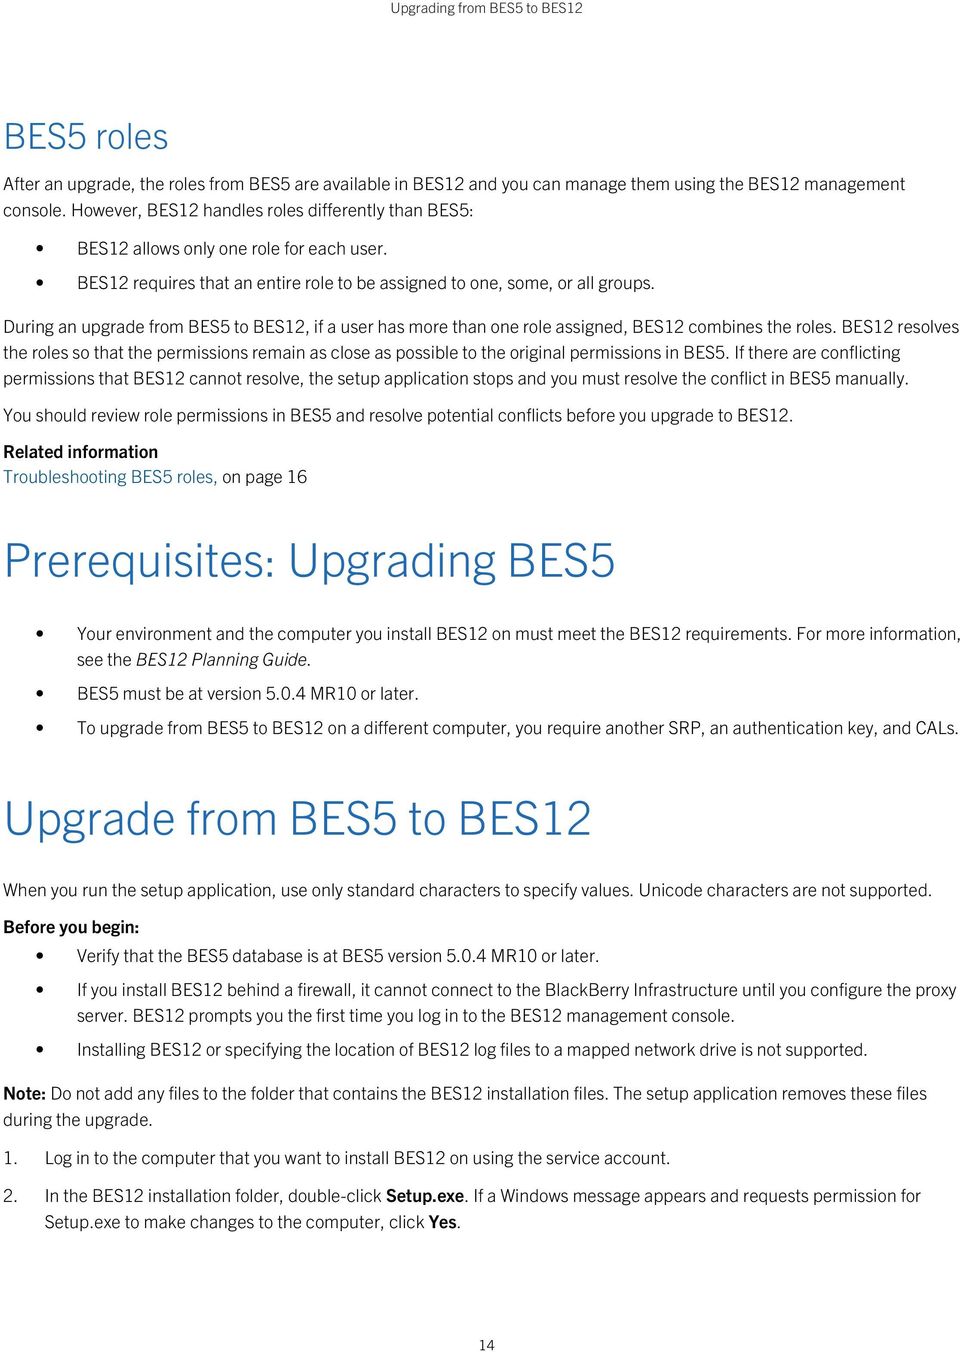 During an upgrade from BES5 to BES12, if a user has more than one role assigned, BES12 combines the roles.